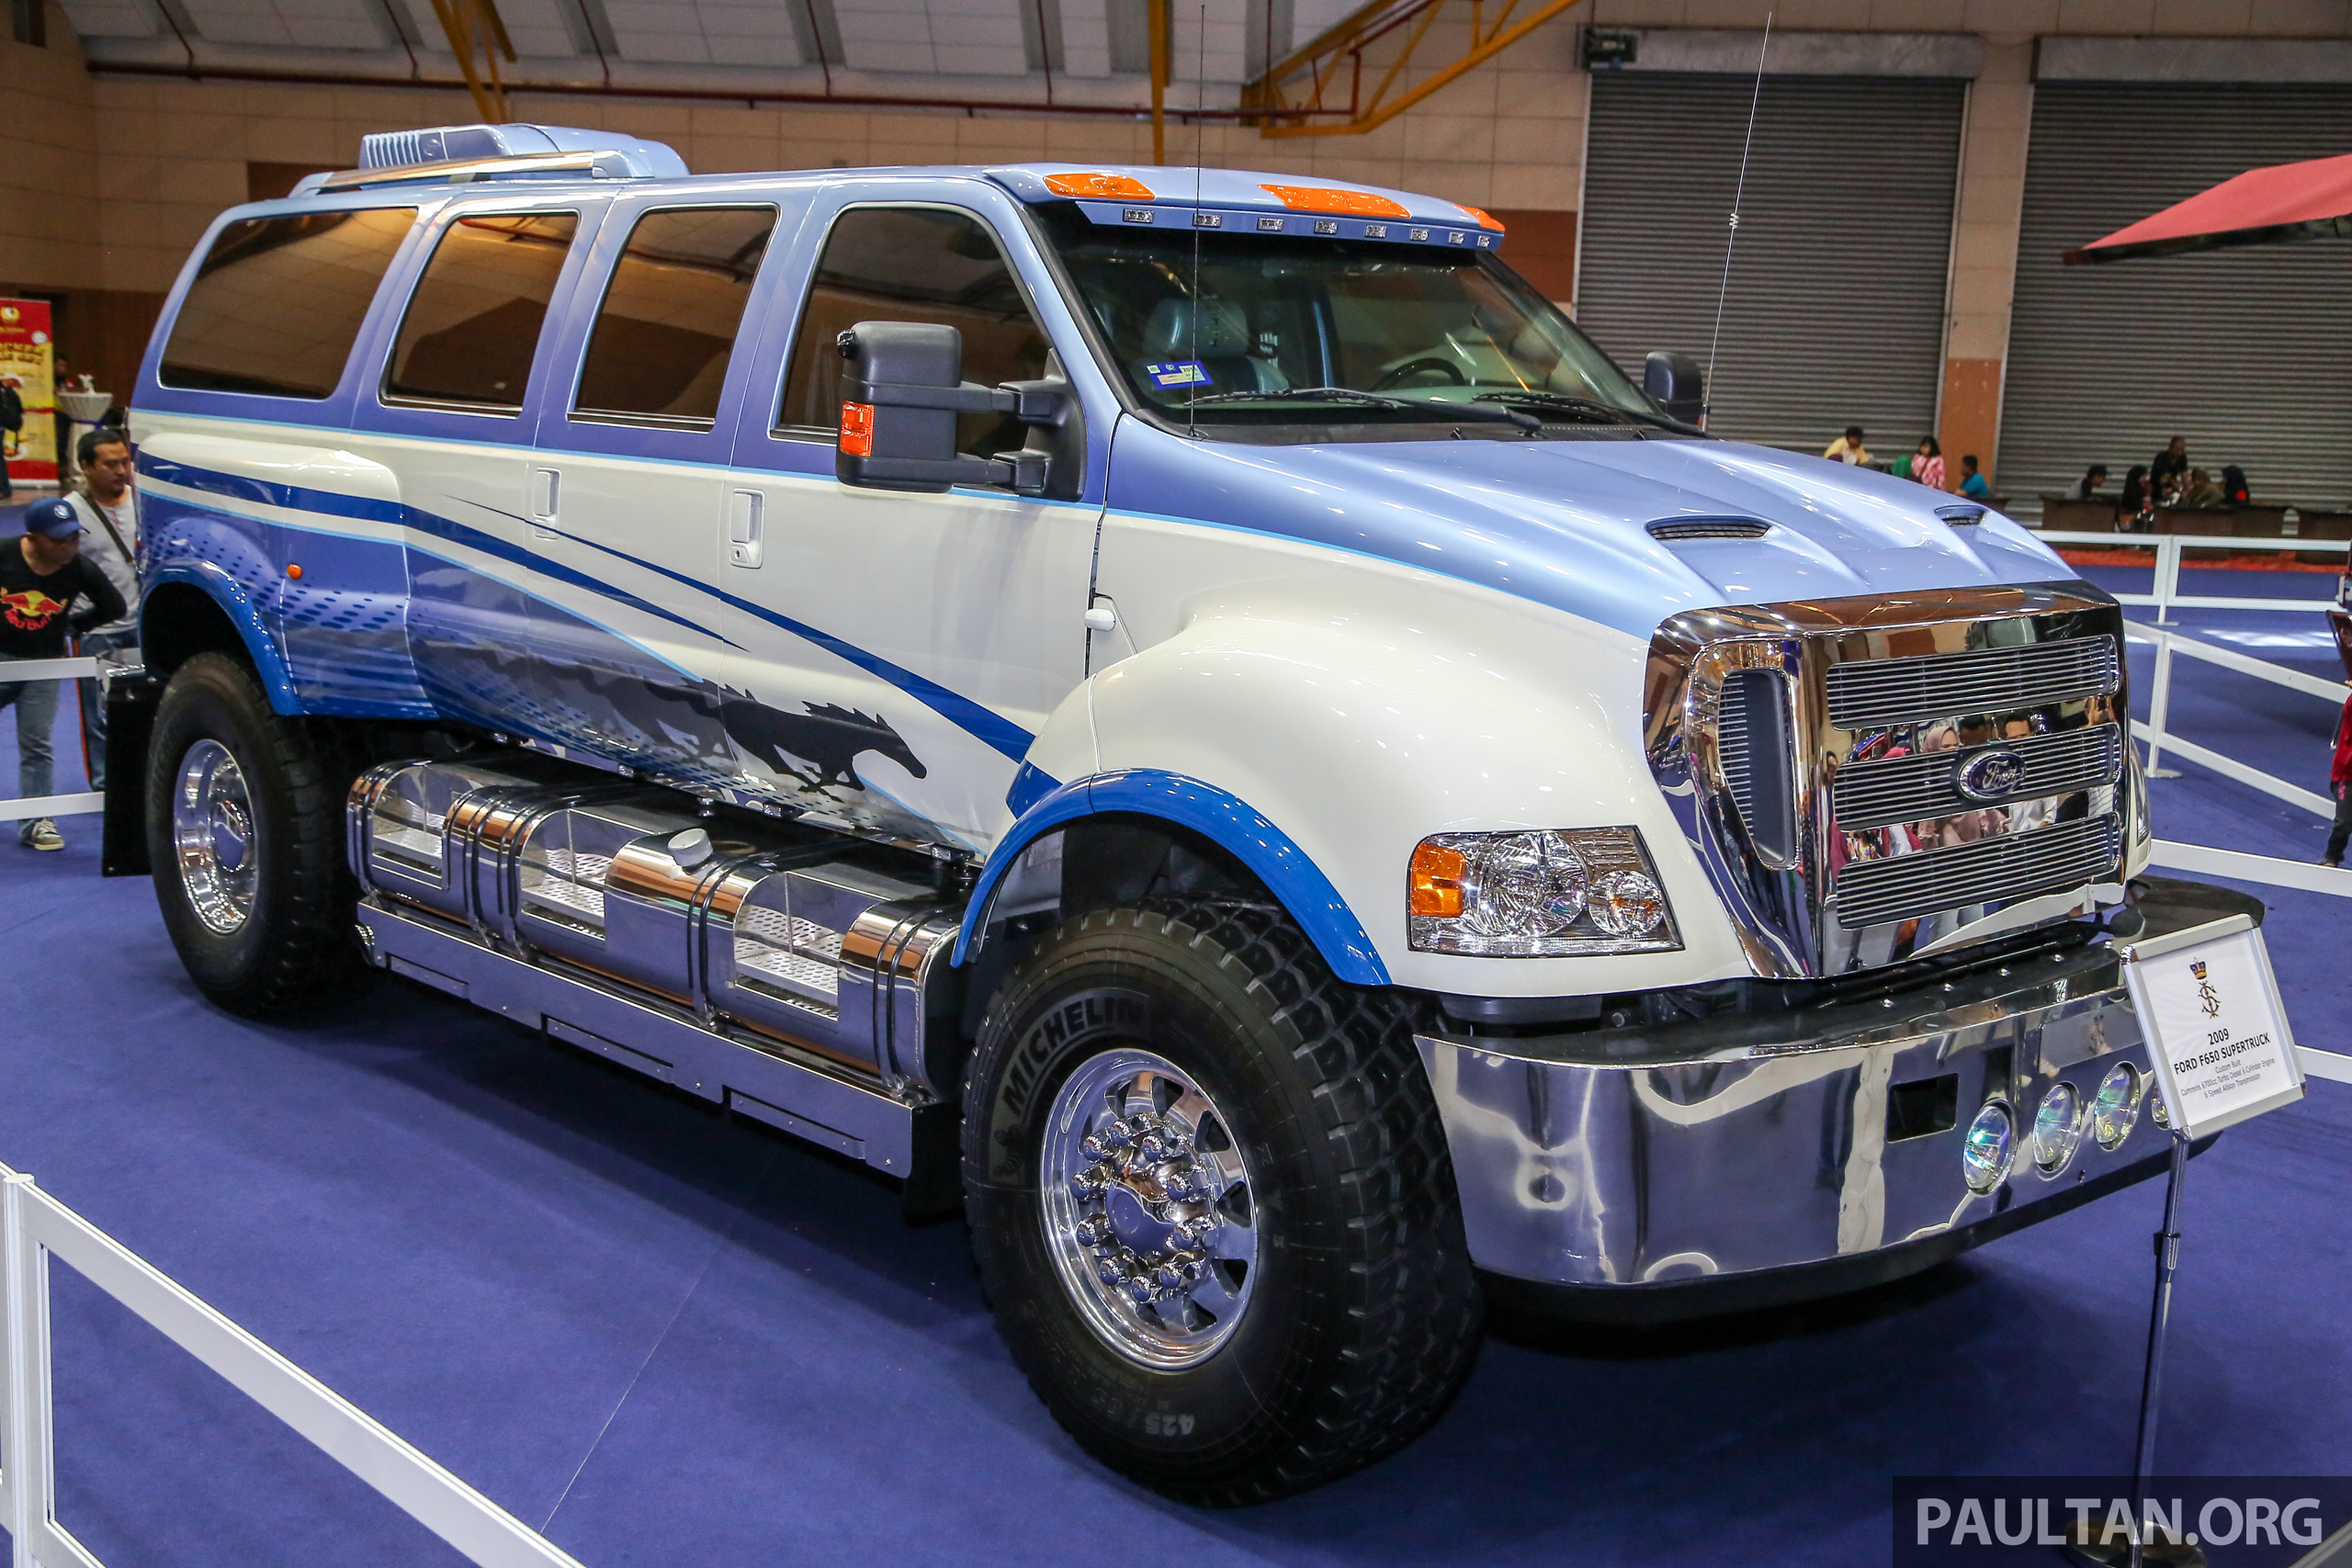 GALLERY: Johor Sultan's custom-built Ford F-650 super truck at the 2018